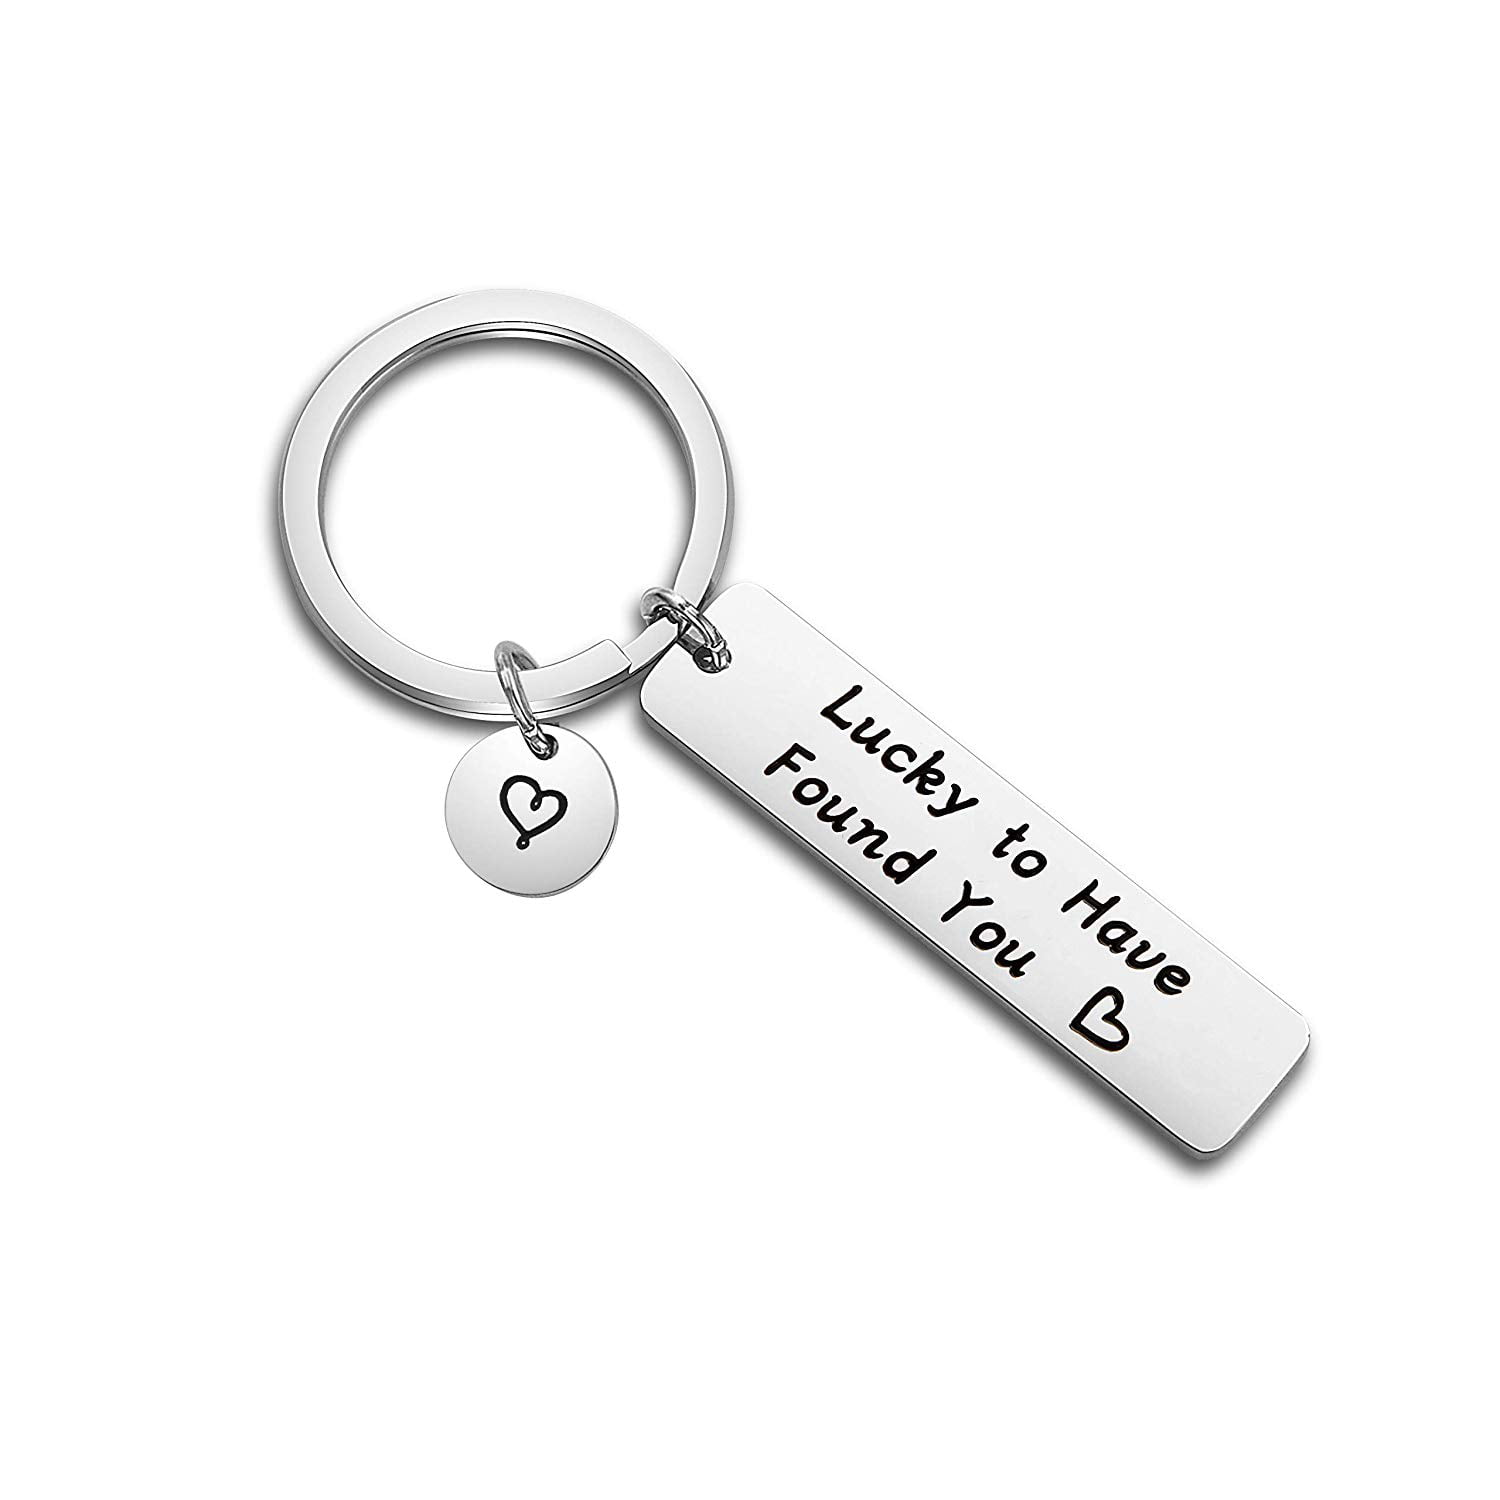 Anniversary Gift For Love - Couple Keychain - Boyfriend Anniversary Gift -  Couple Date Keychain - VivaGifts